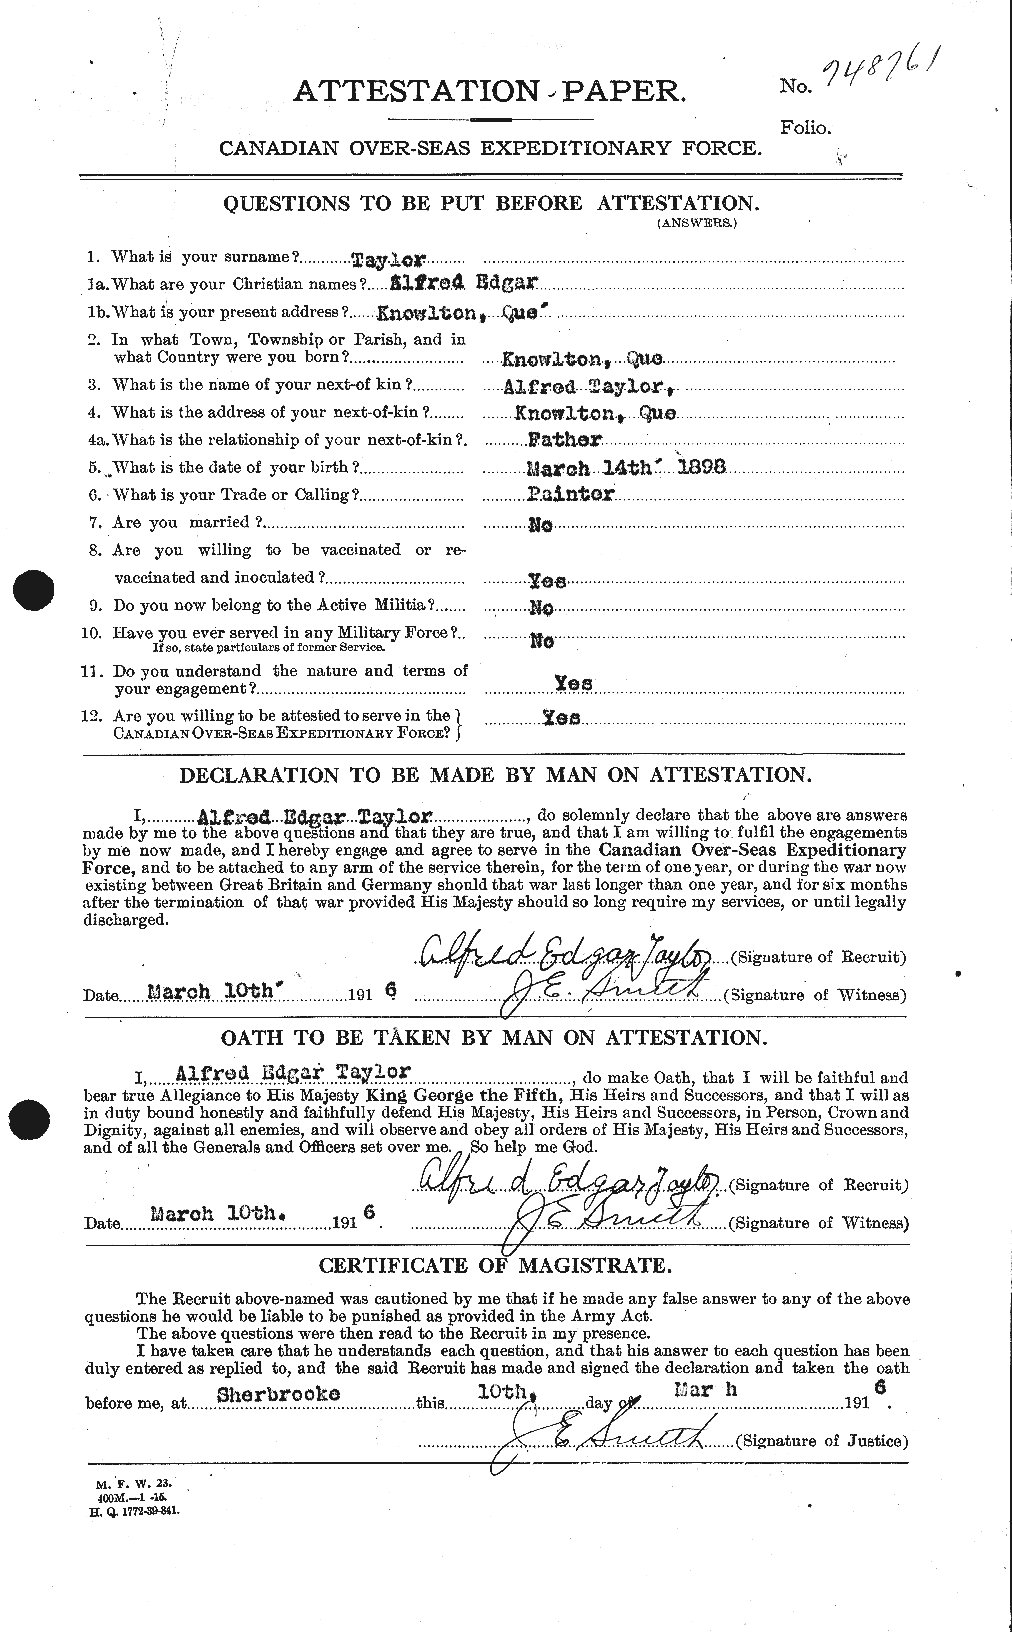 Personnel Records of the First World War - CEF 626182a